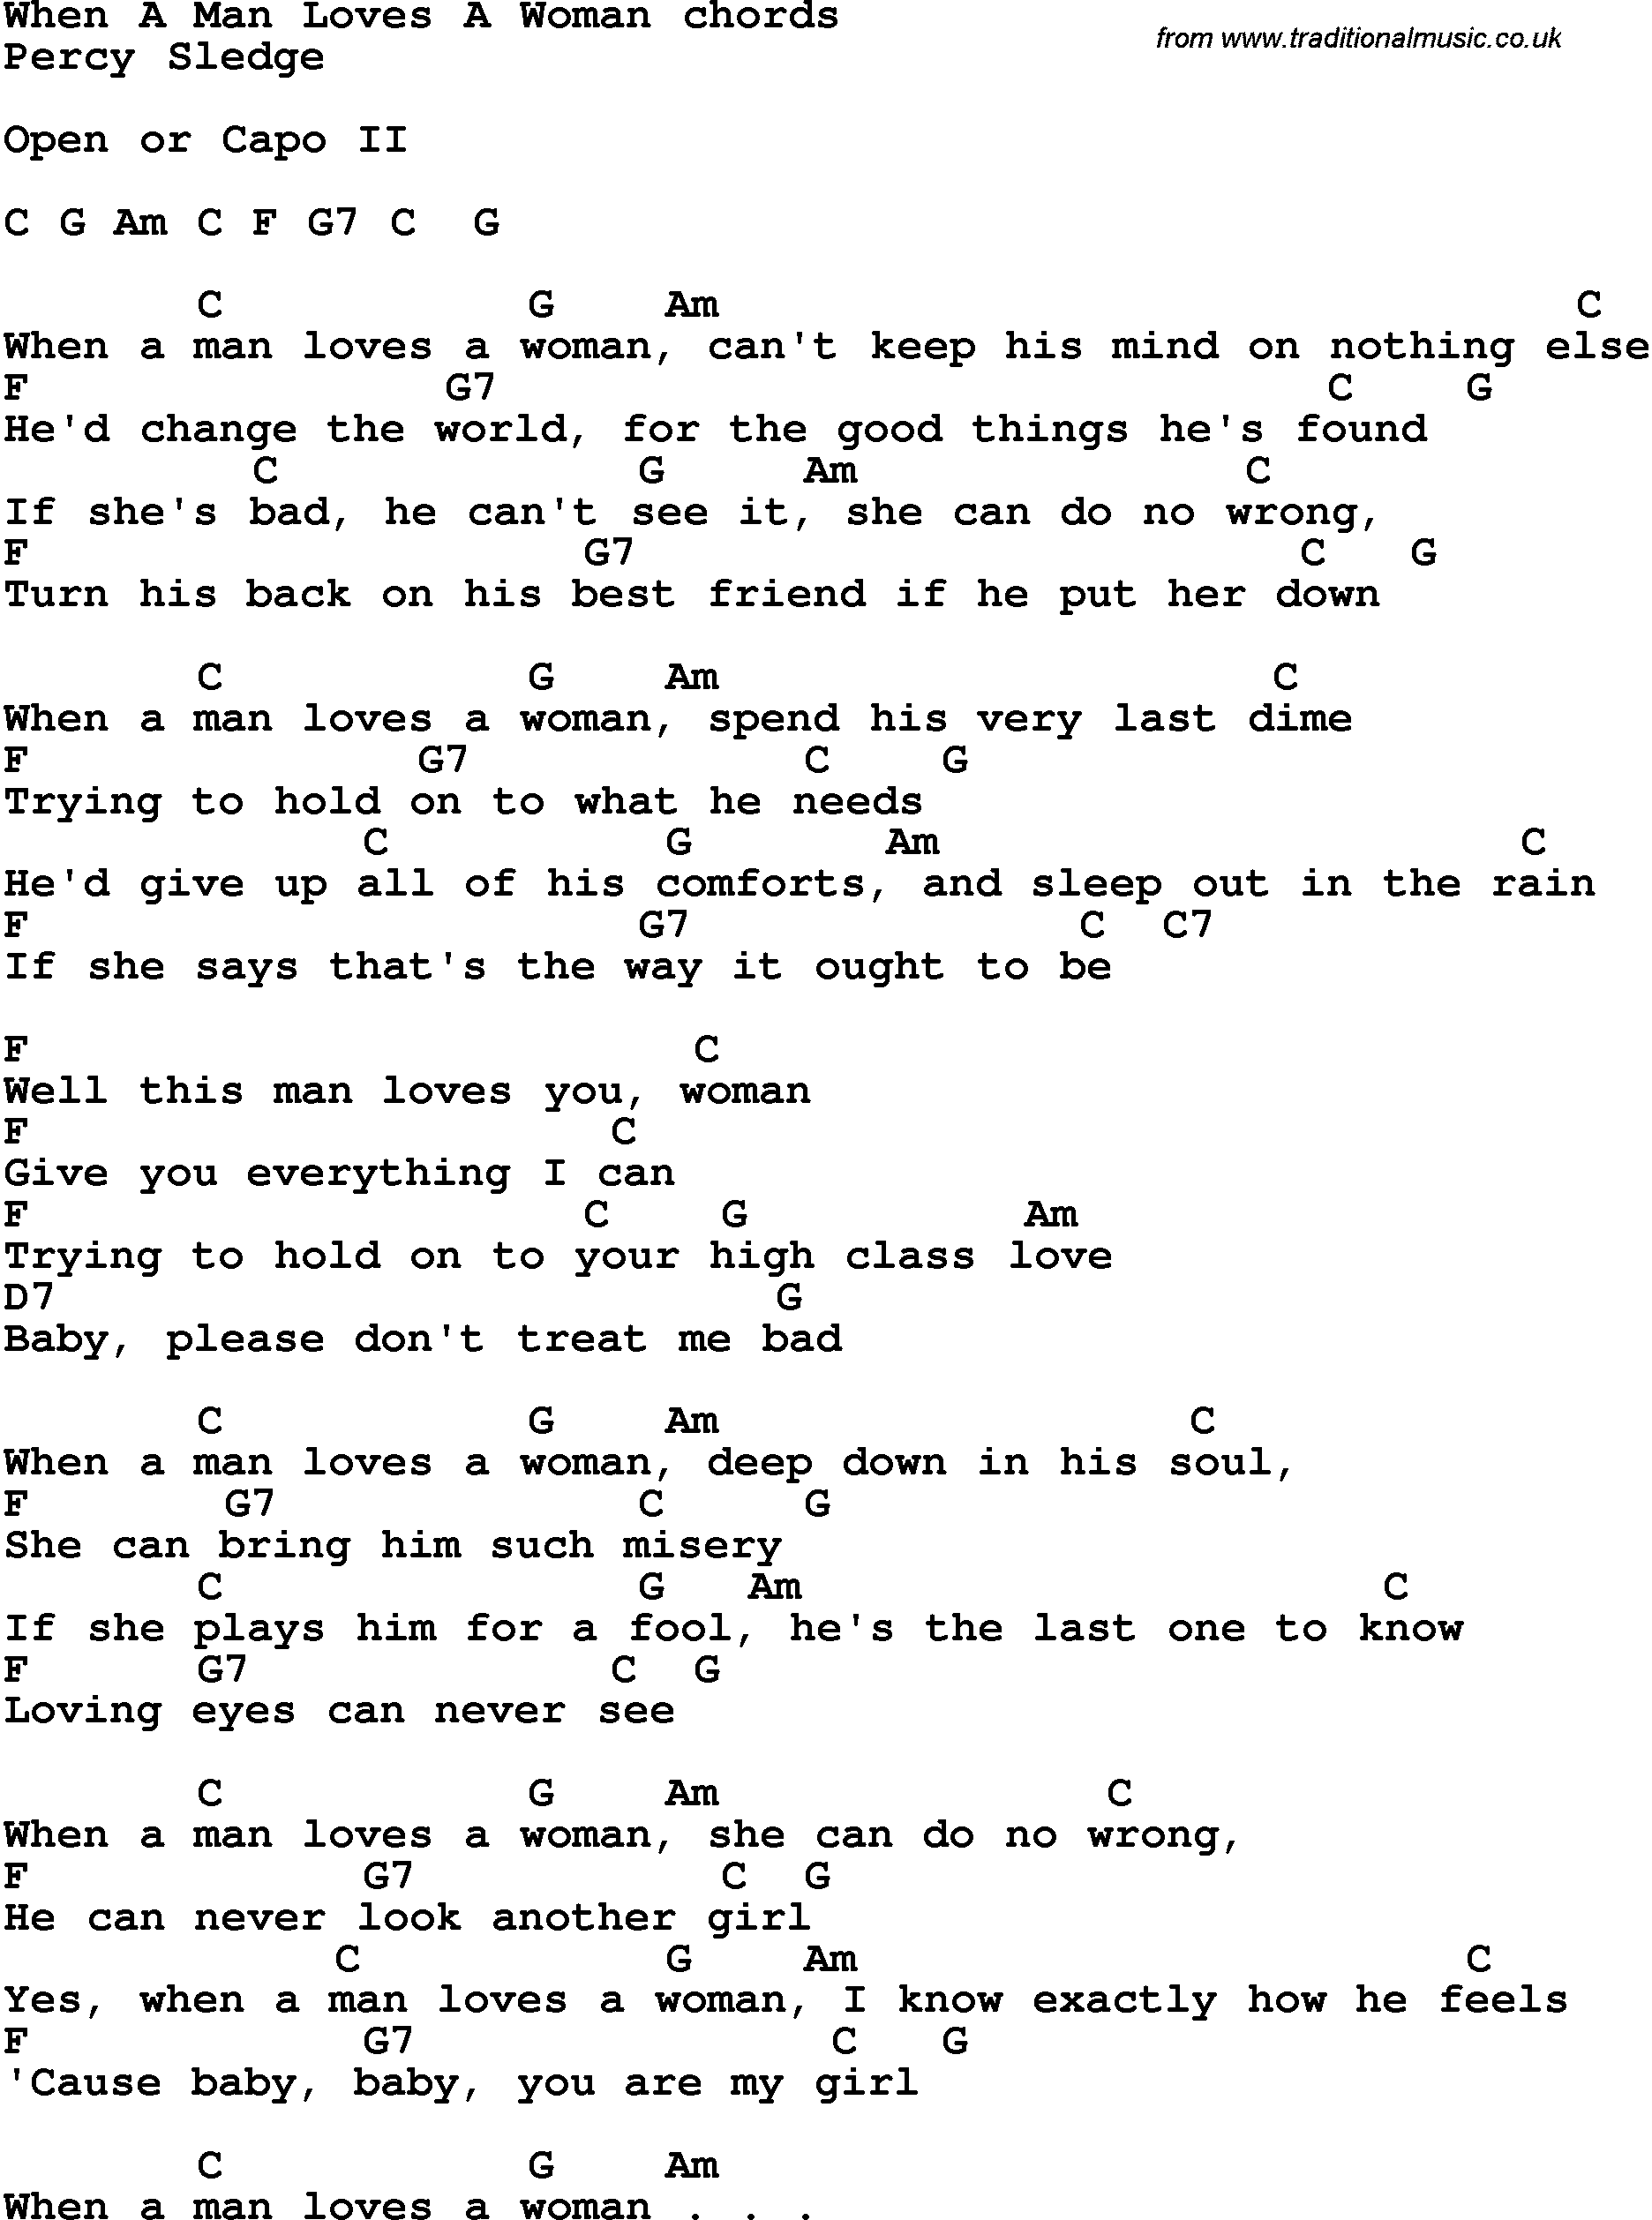 Song Lyrics with guitar chords for When A Man Loves A Woman